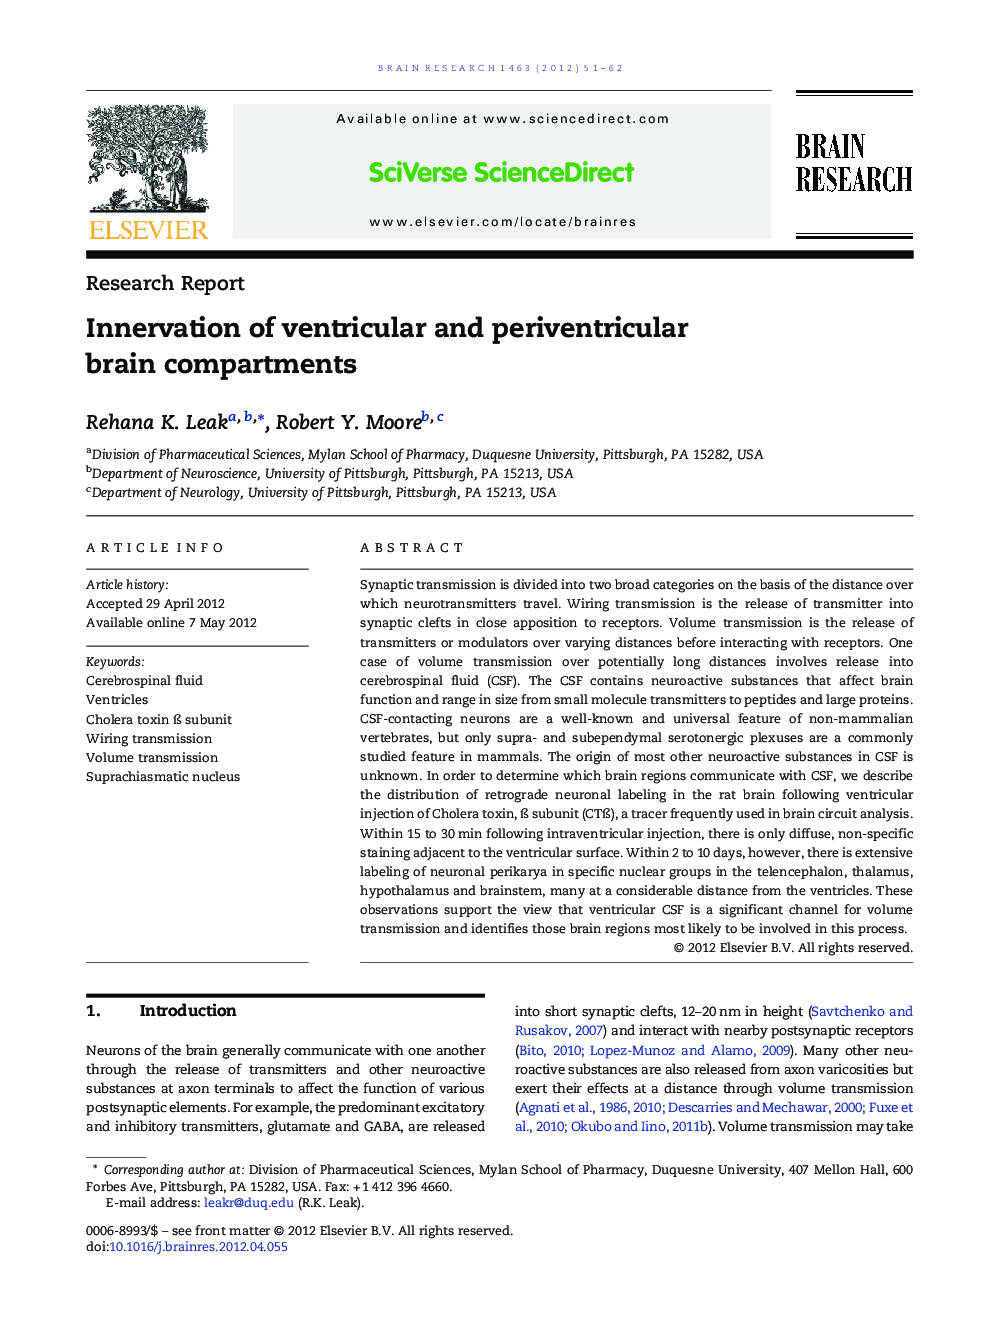 Innervation of ventricular and periventricular brain compartments